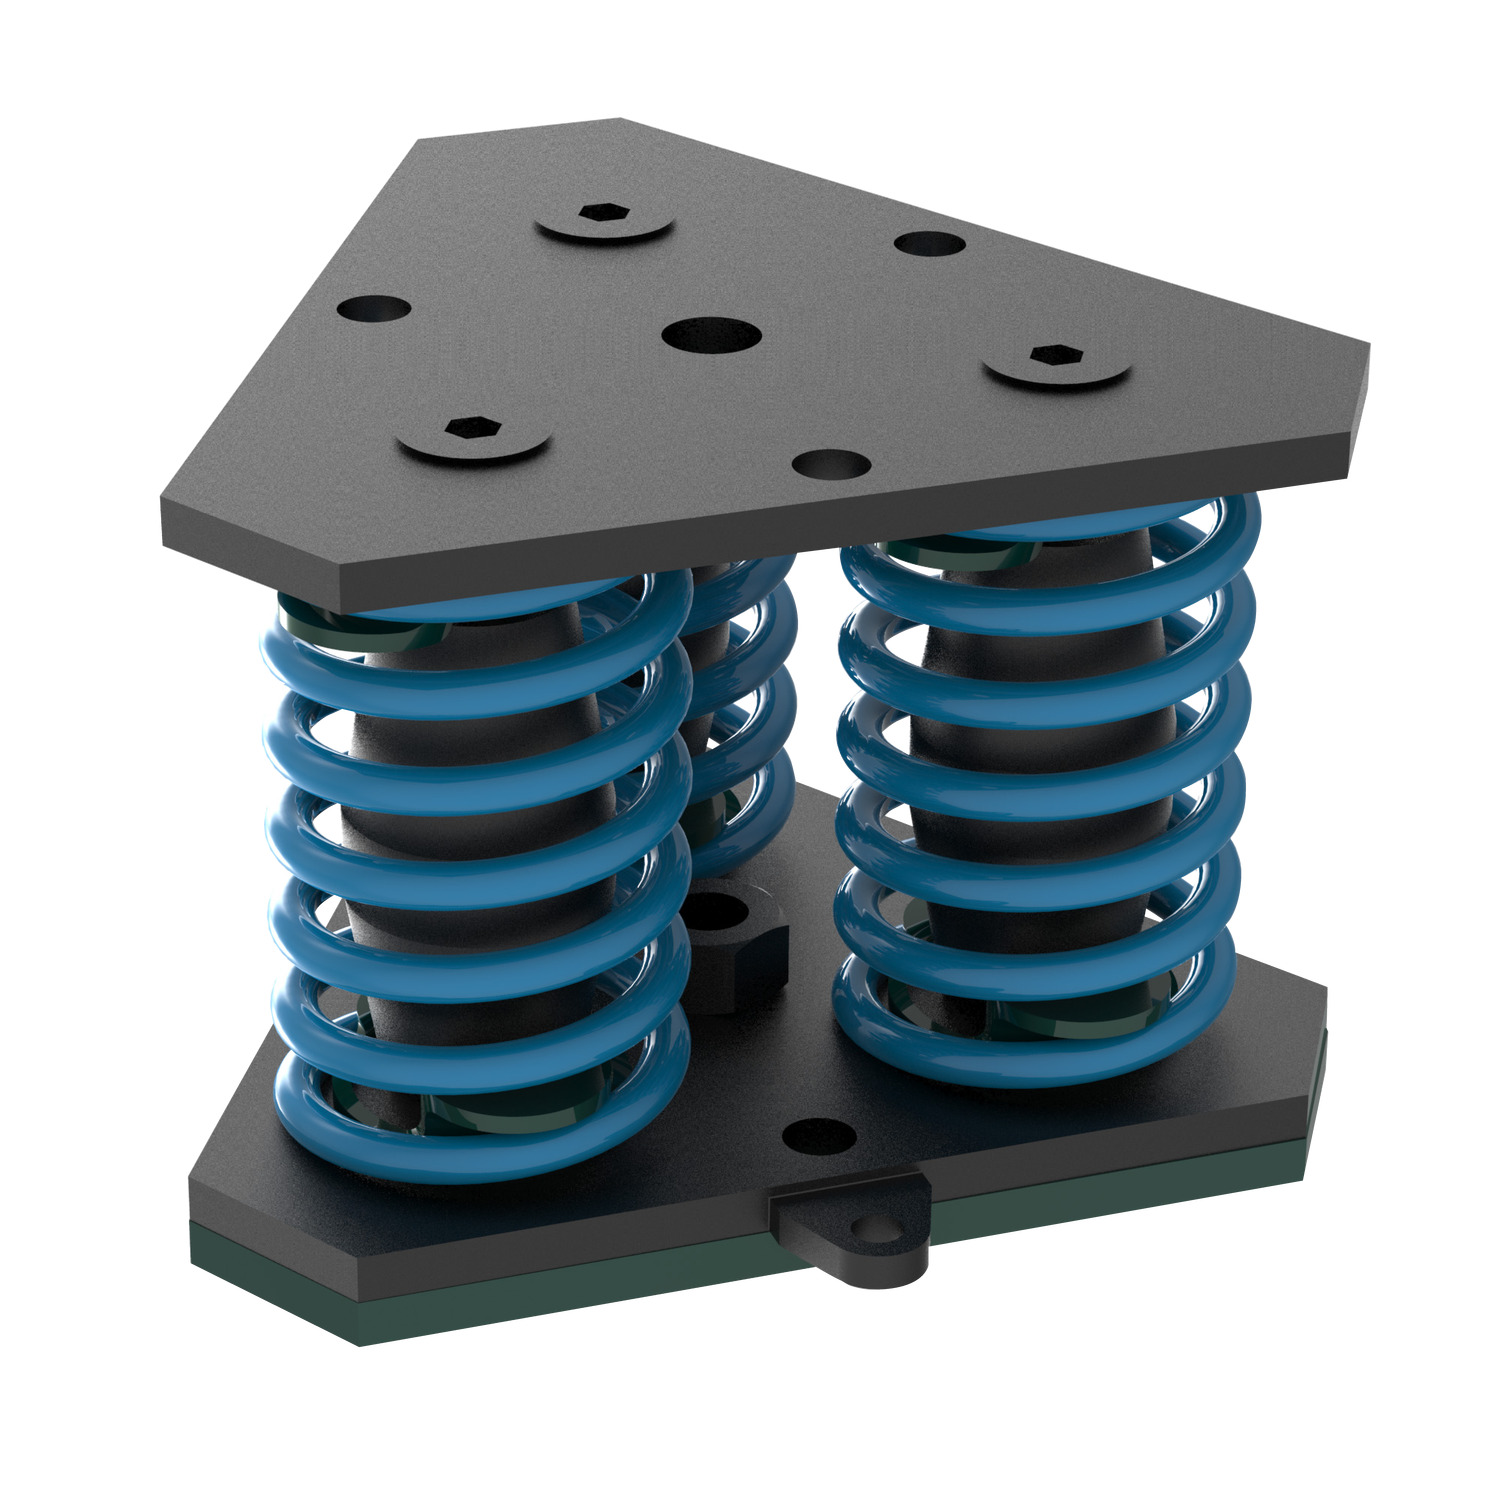 Spring Vibration Damper three spring The sylomer mat that these dampers incorporate, isolates the mid-high frequency vibrations which are transmitted through the coils of the metal springs.